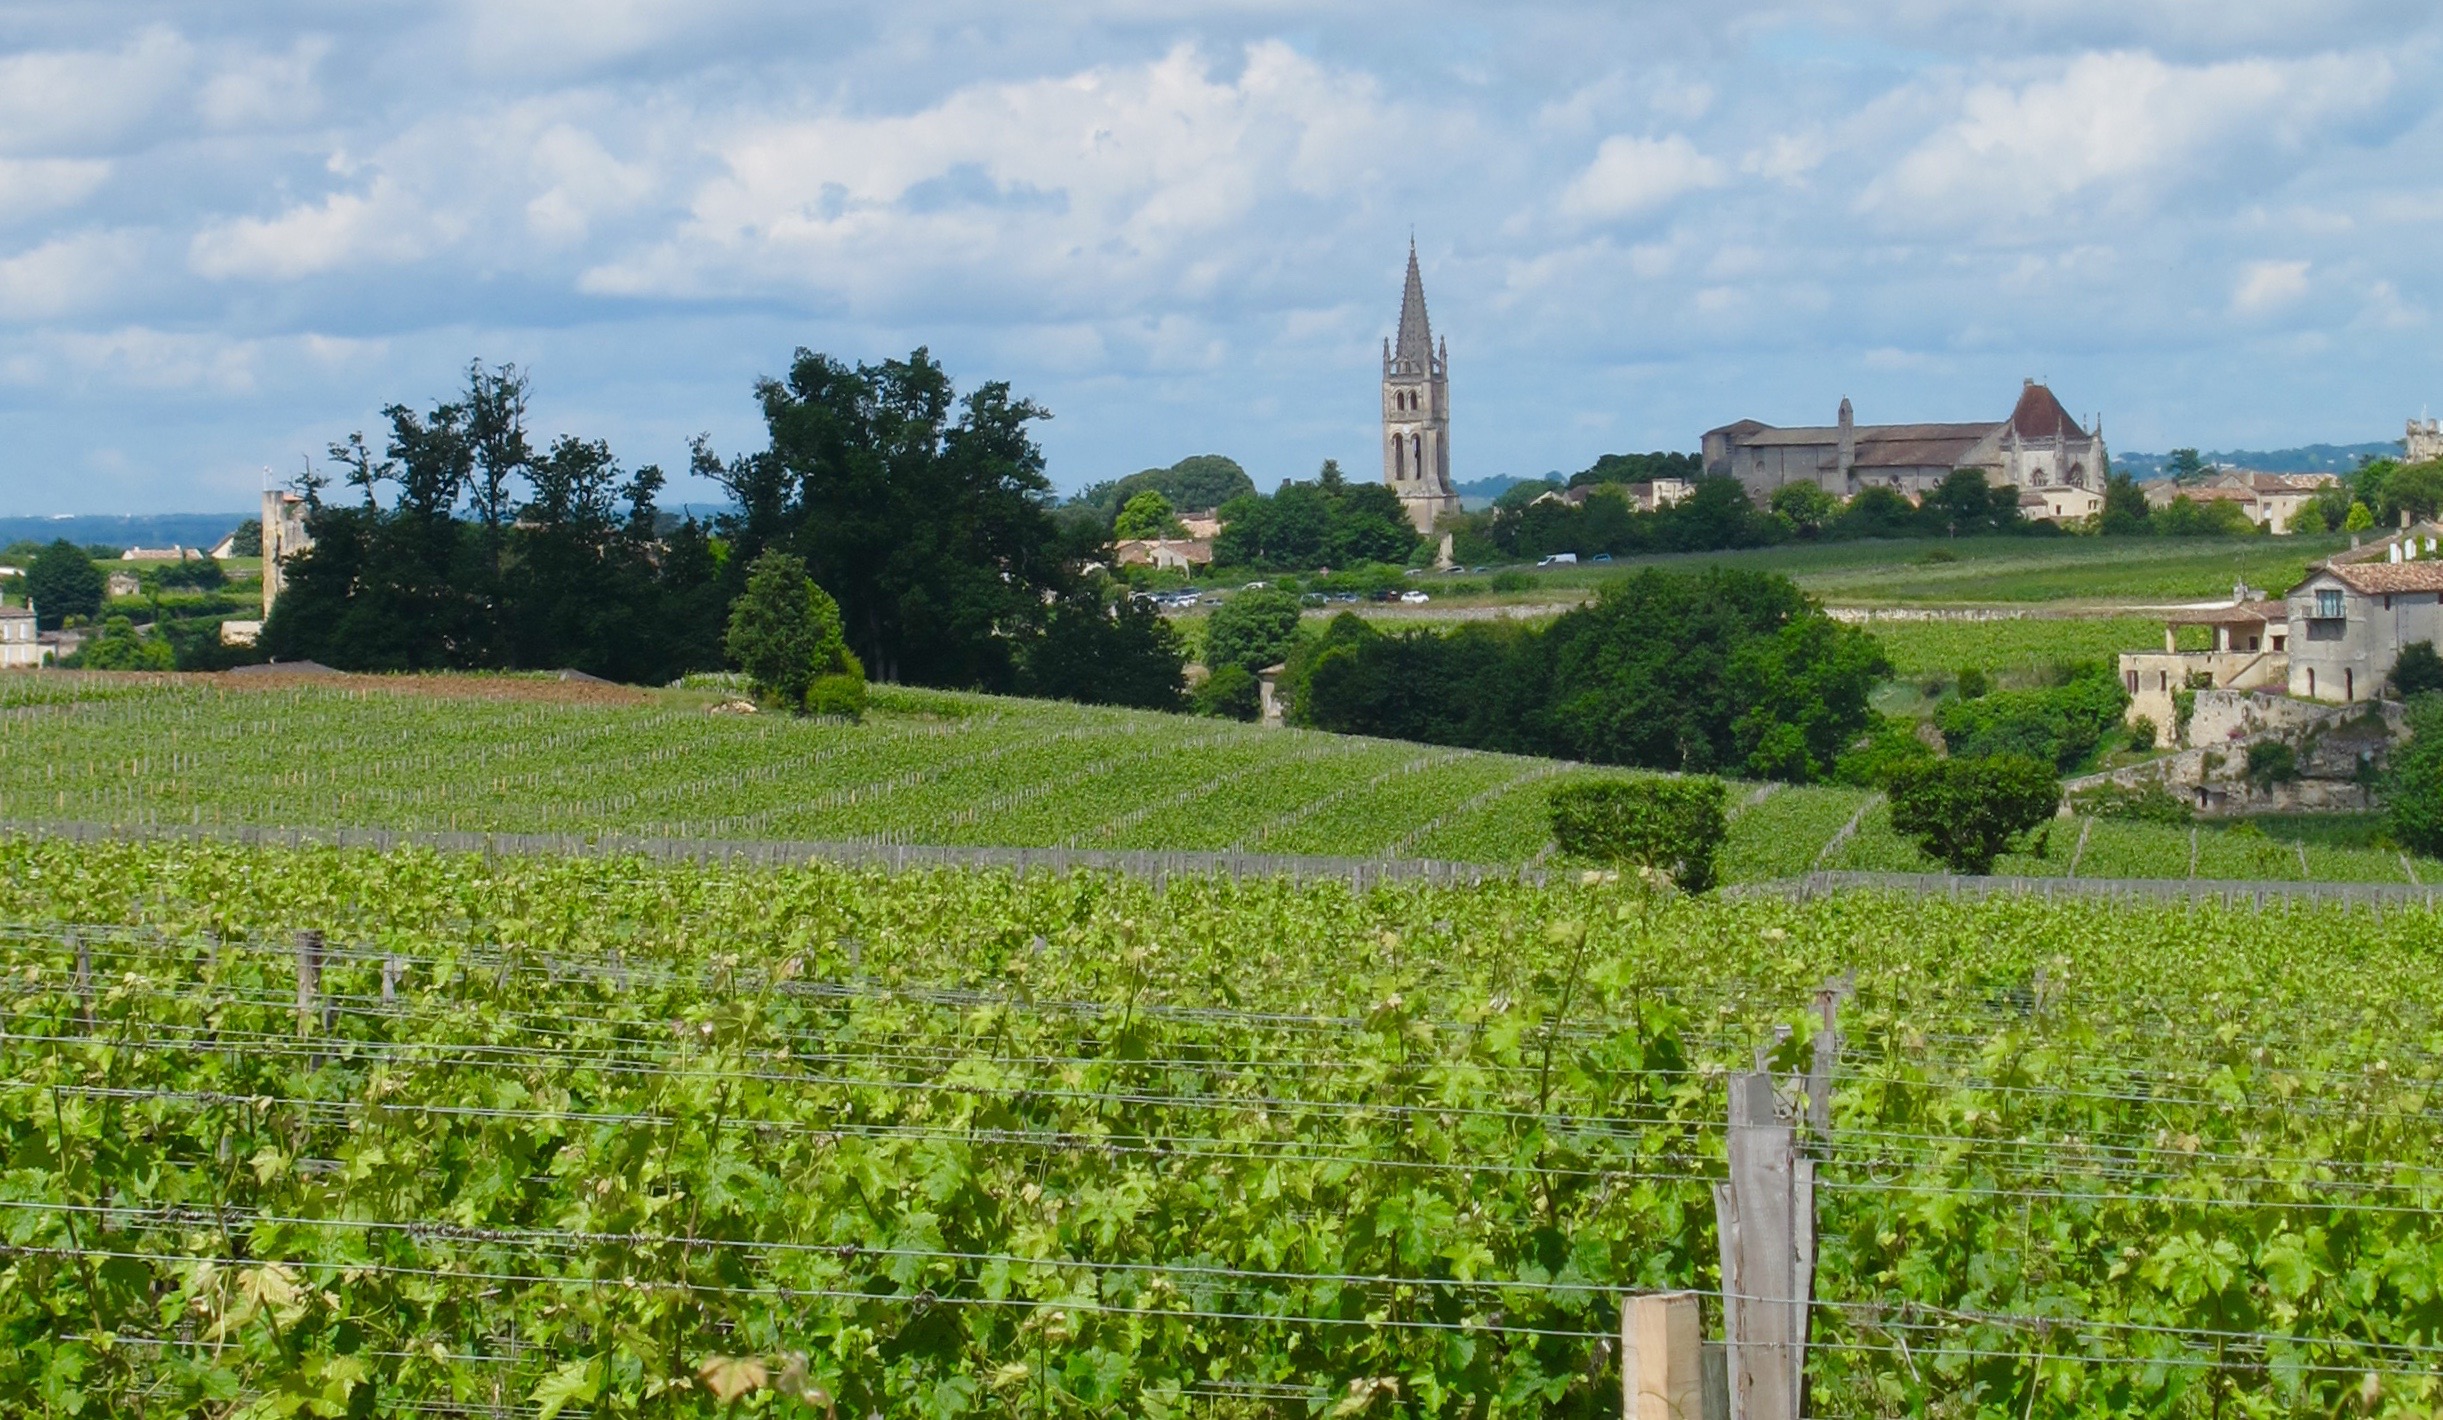 The village of Saint-Émilion sits on top of a hill and begs for your visit. Photo by Marla Norman.